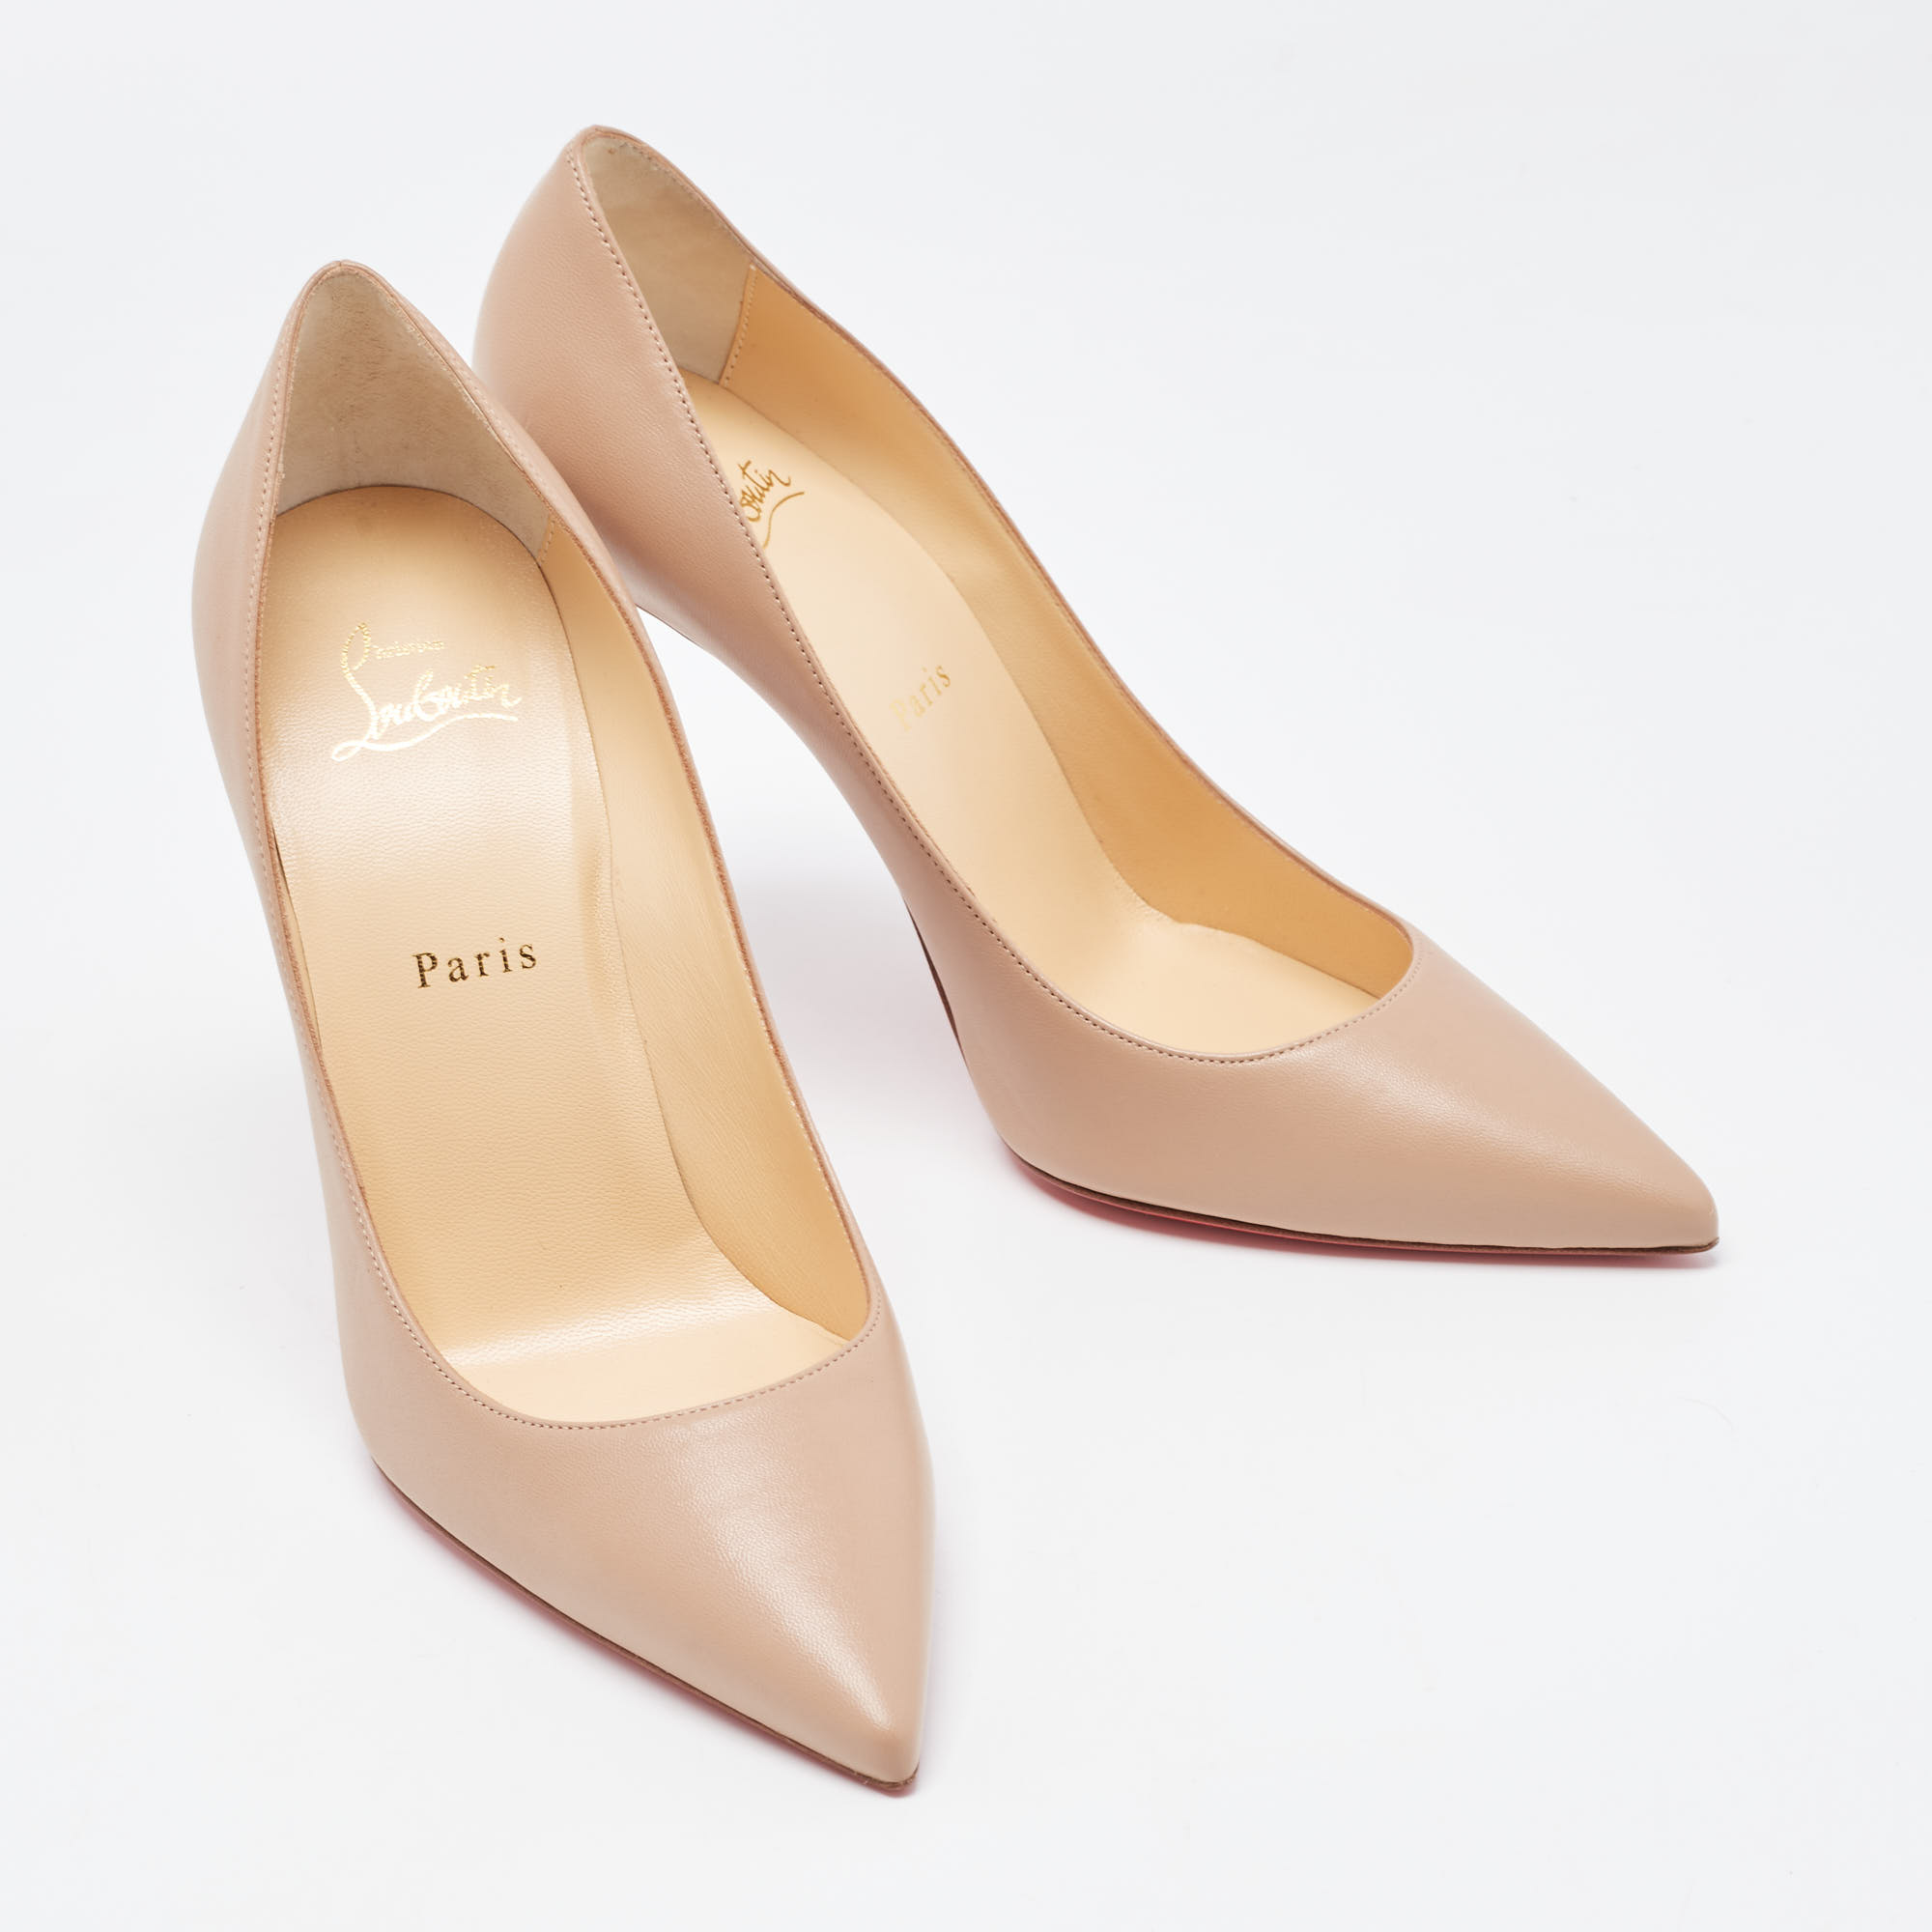 Christian Louboutin Beige Leather So Kate Pumps Size 39.5